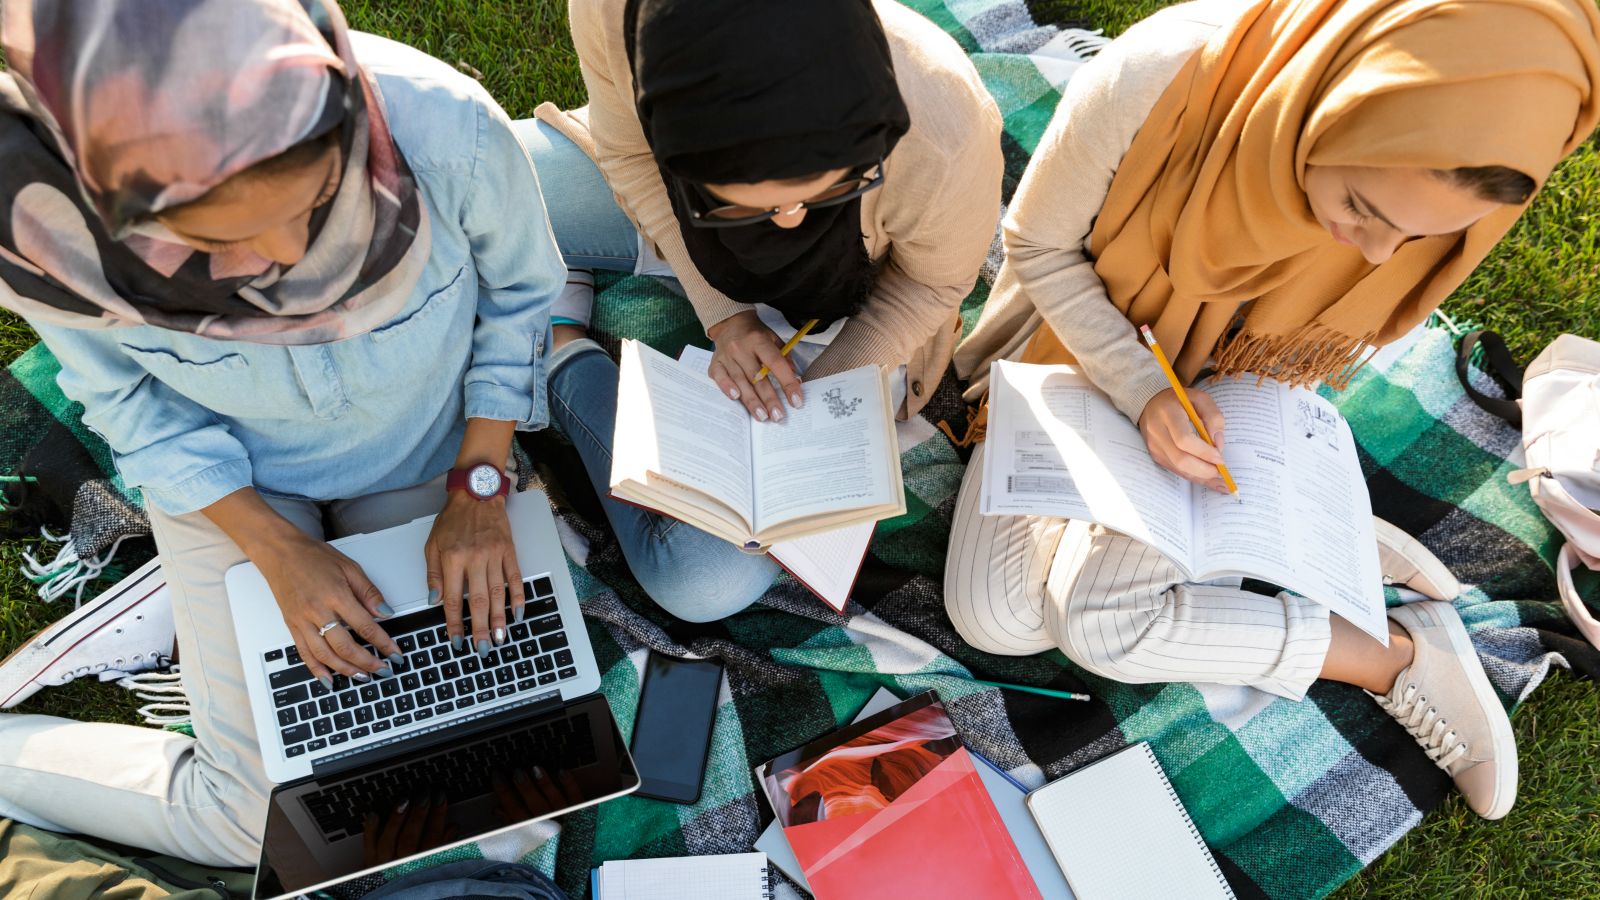 Saudi teachers sit outside on a blanket with a laptop, books and notes.